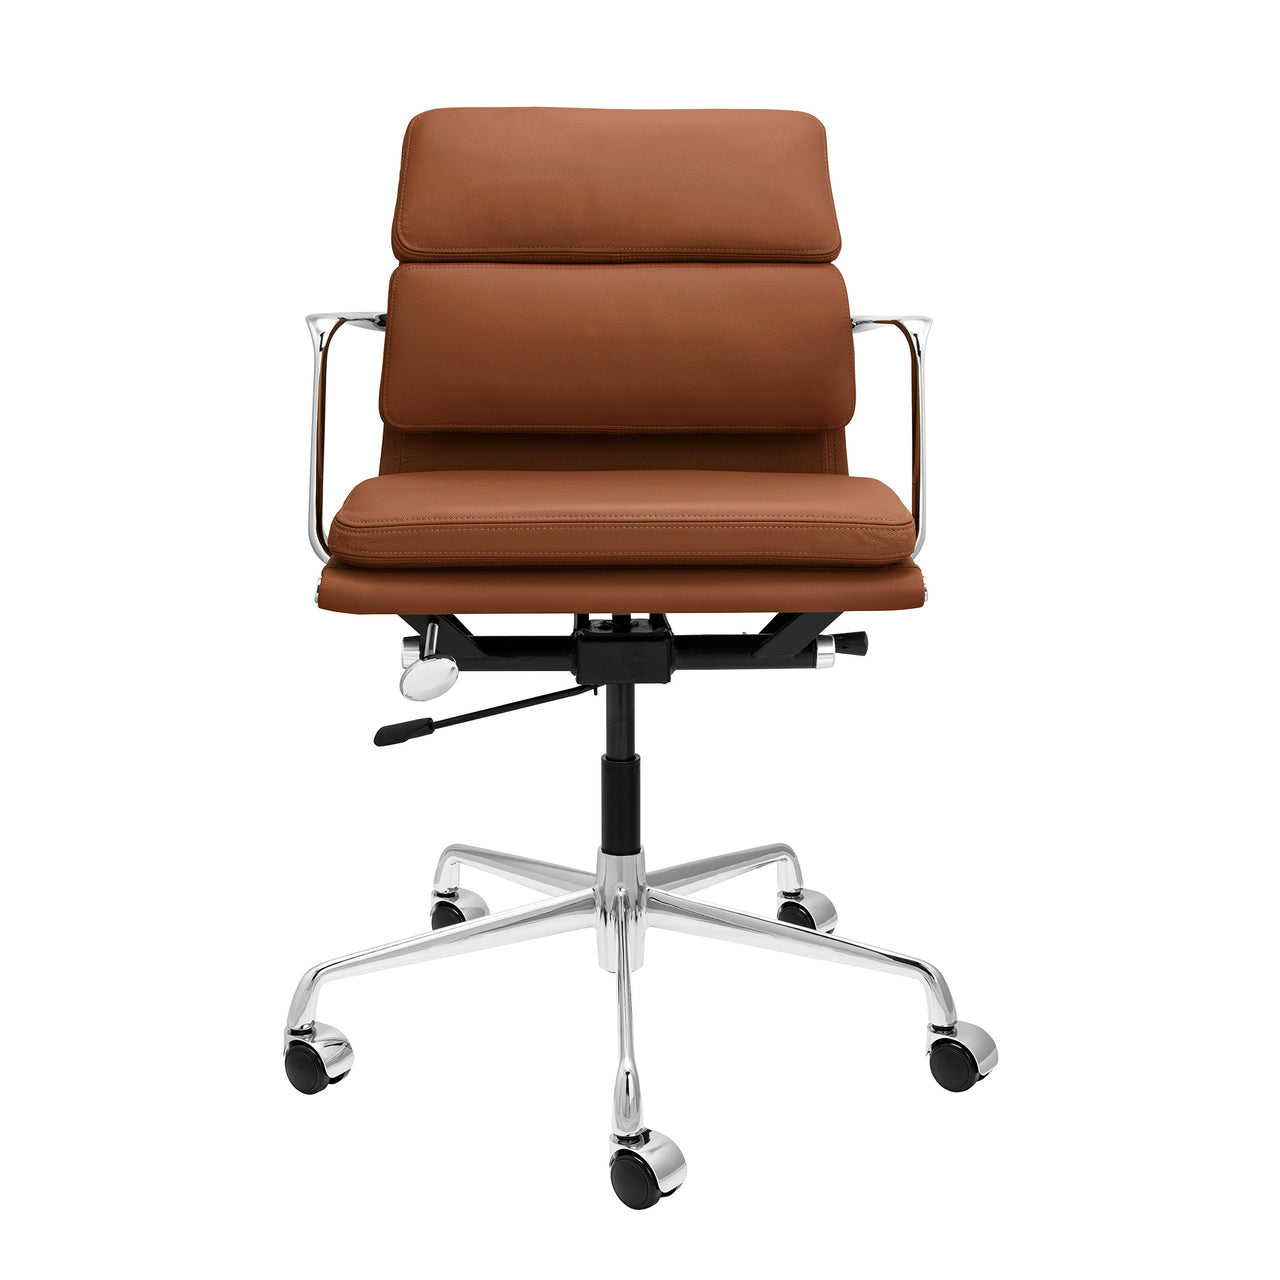 Pro Soft Pad Management Chair (Brown Italian Leather)